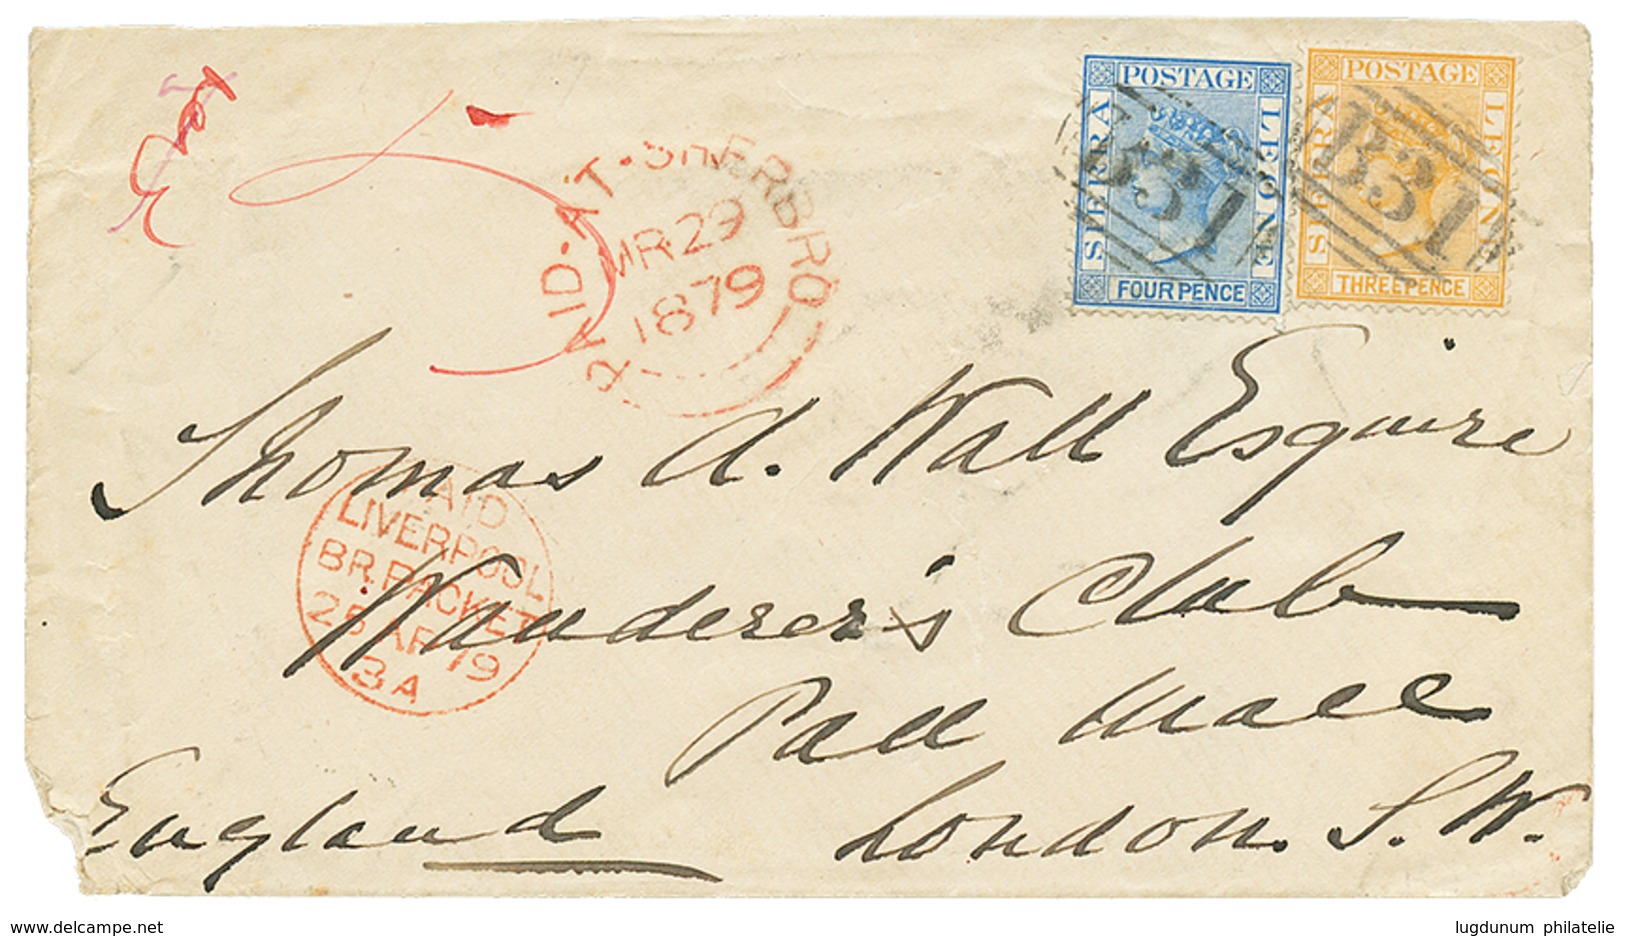 1333 1879 3d + 4d Canc. B51 + Red Cachet PAID AT SHERBRO MR 29 1879 On Envelope To ENGLAND. The Earliest Recorded Use Of - Sierra Leone (...-1960)